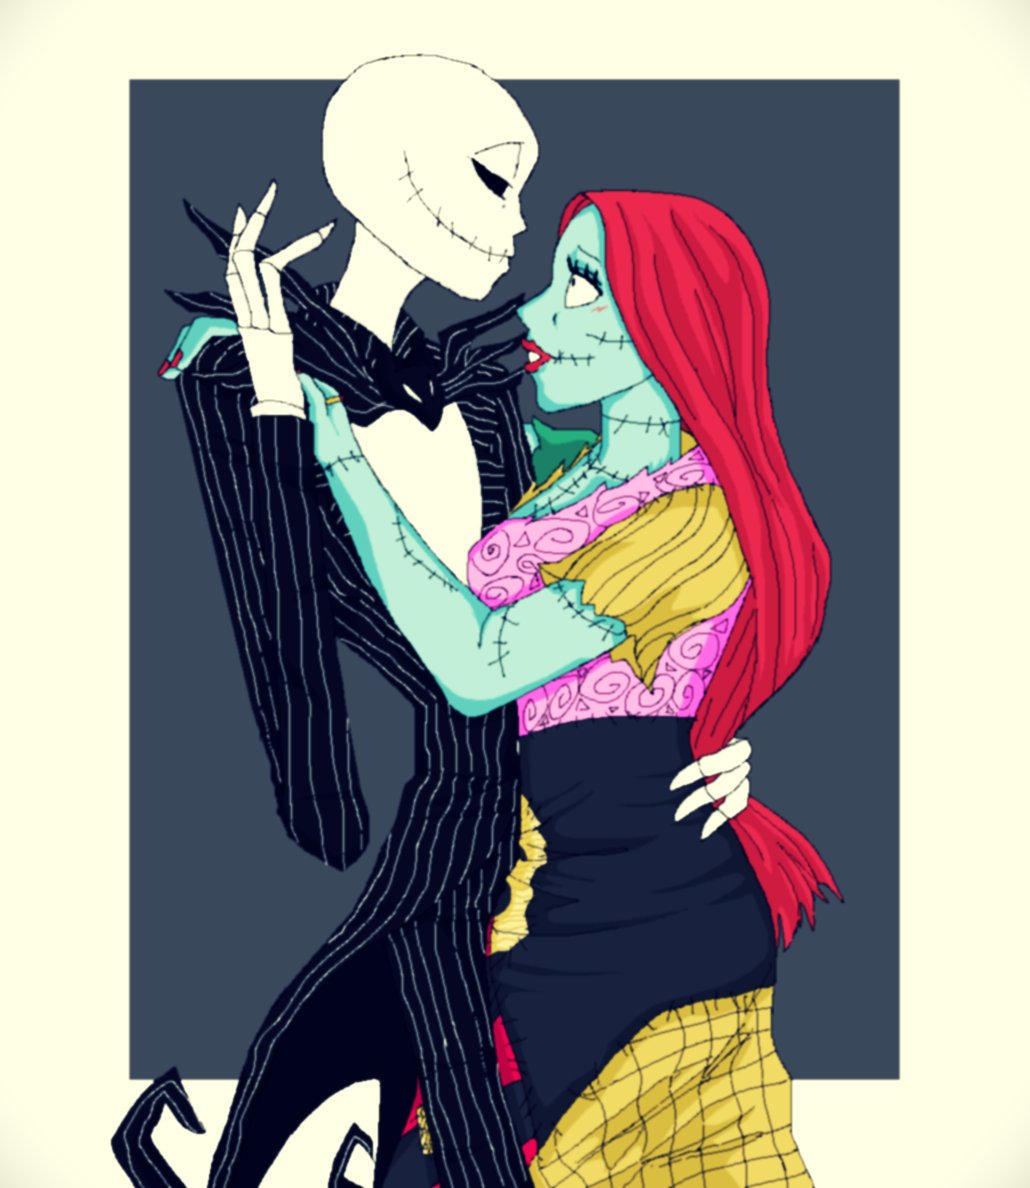 I haven't drawn Jack and Sally in many years. Decided I should change that! Will be needing lots of practice but this was a great attempt after so long... #thenightmarebeforechristmas #jackskellington #jackandsally #fanart #timburton